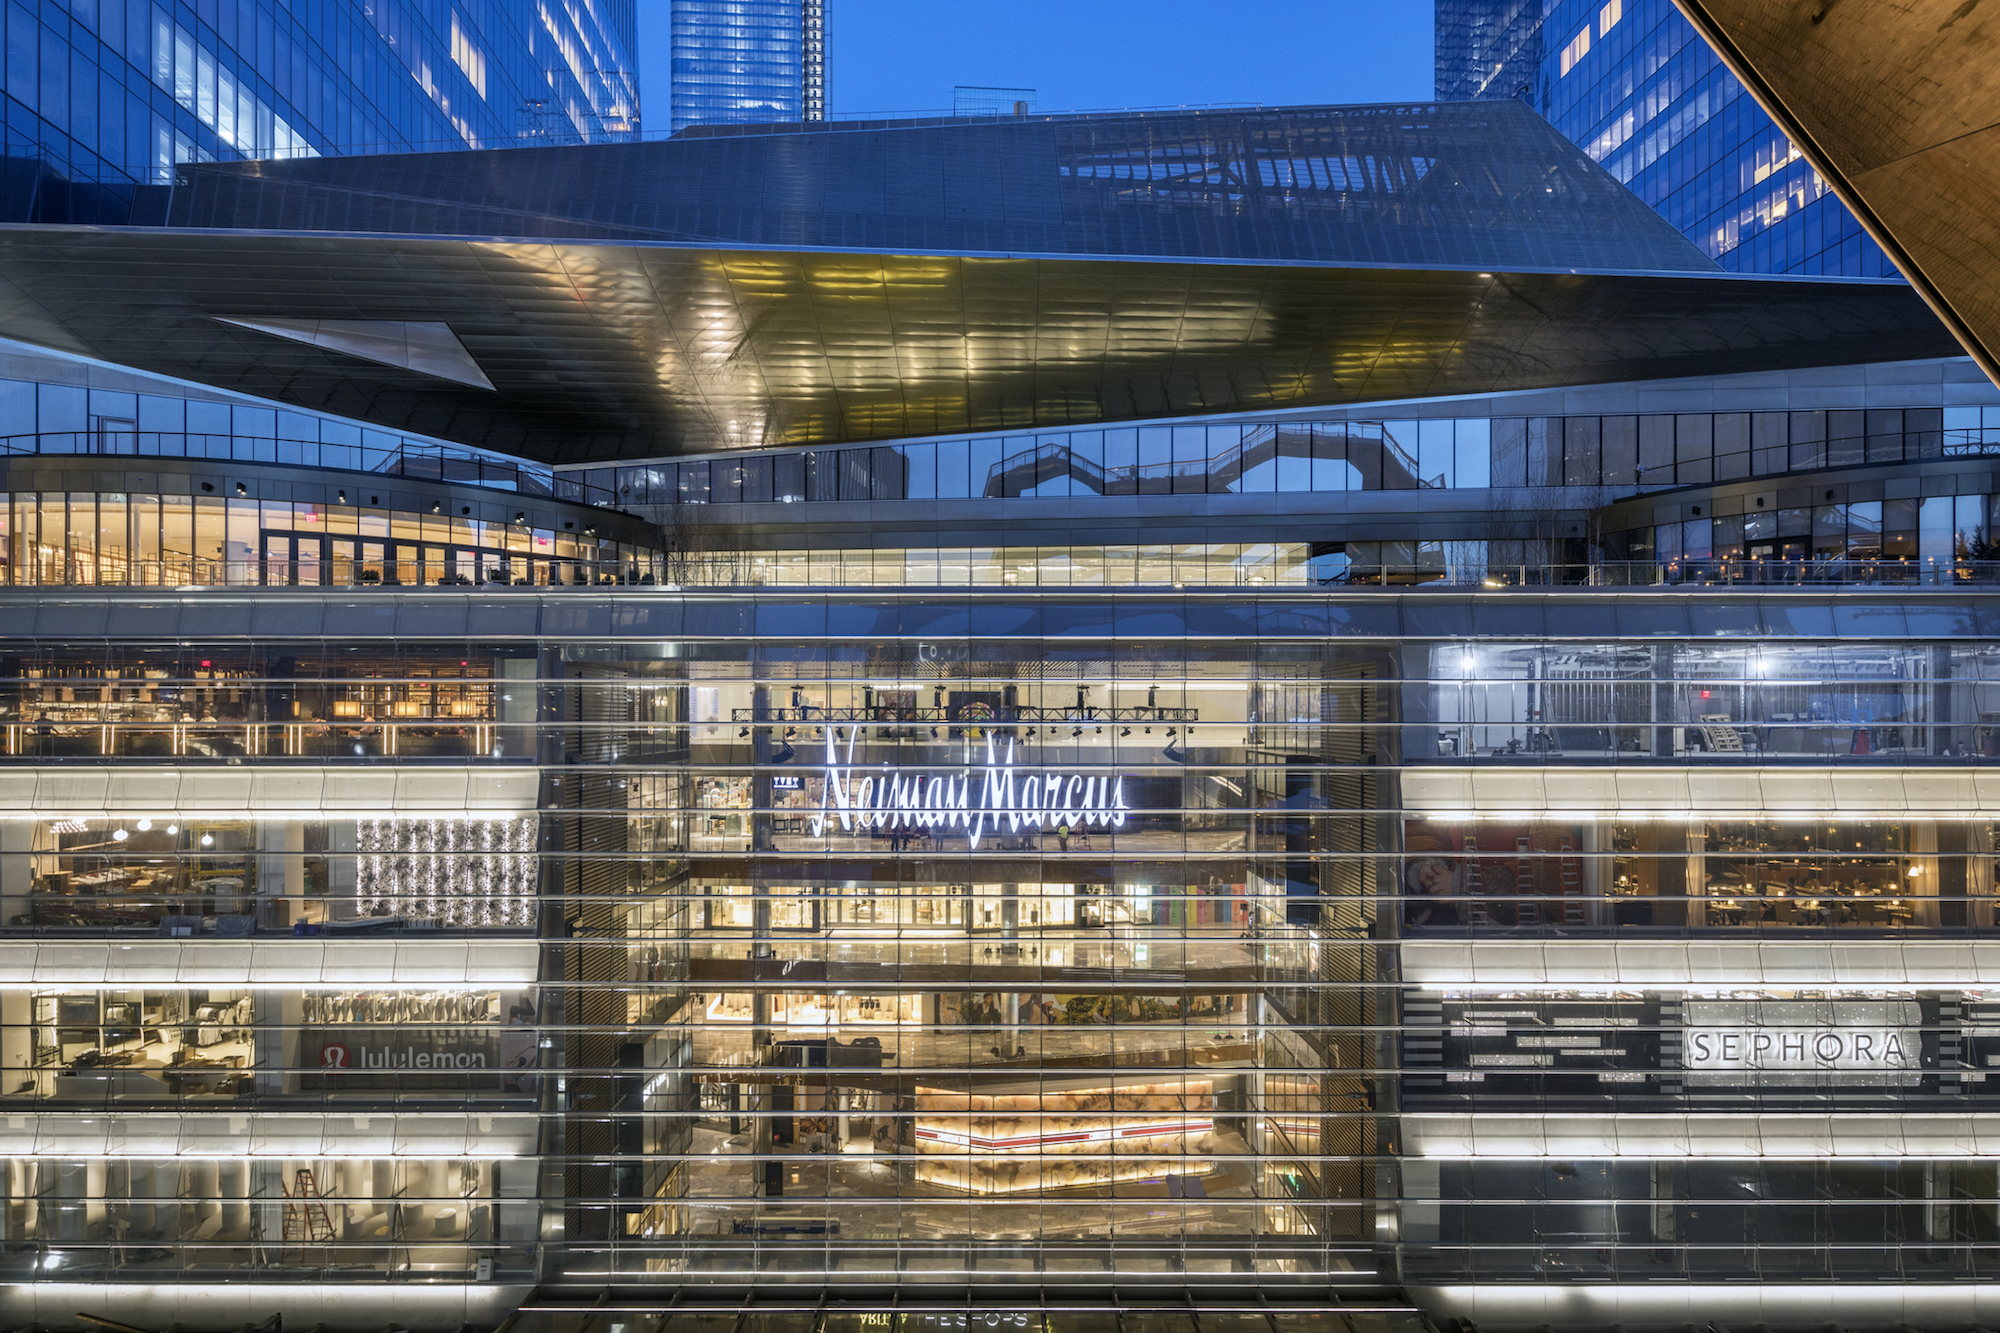 Neiman Marcus Enters New York With High-Tech Hudson Yards Location